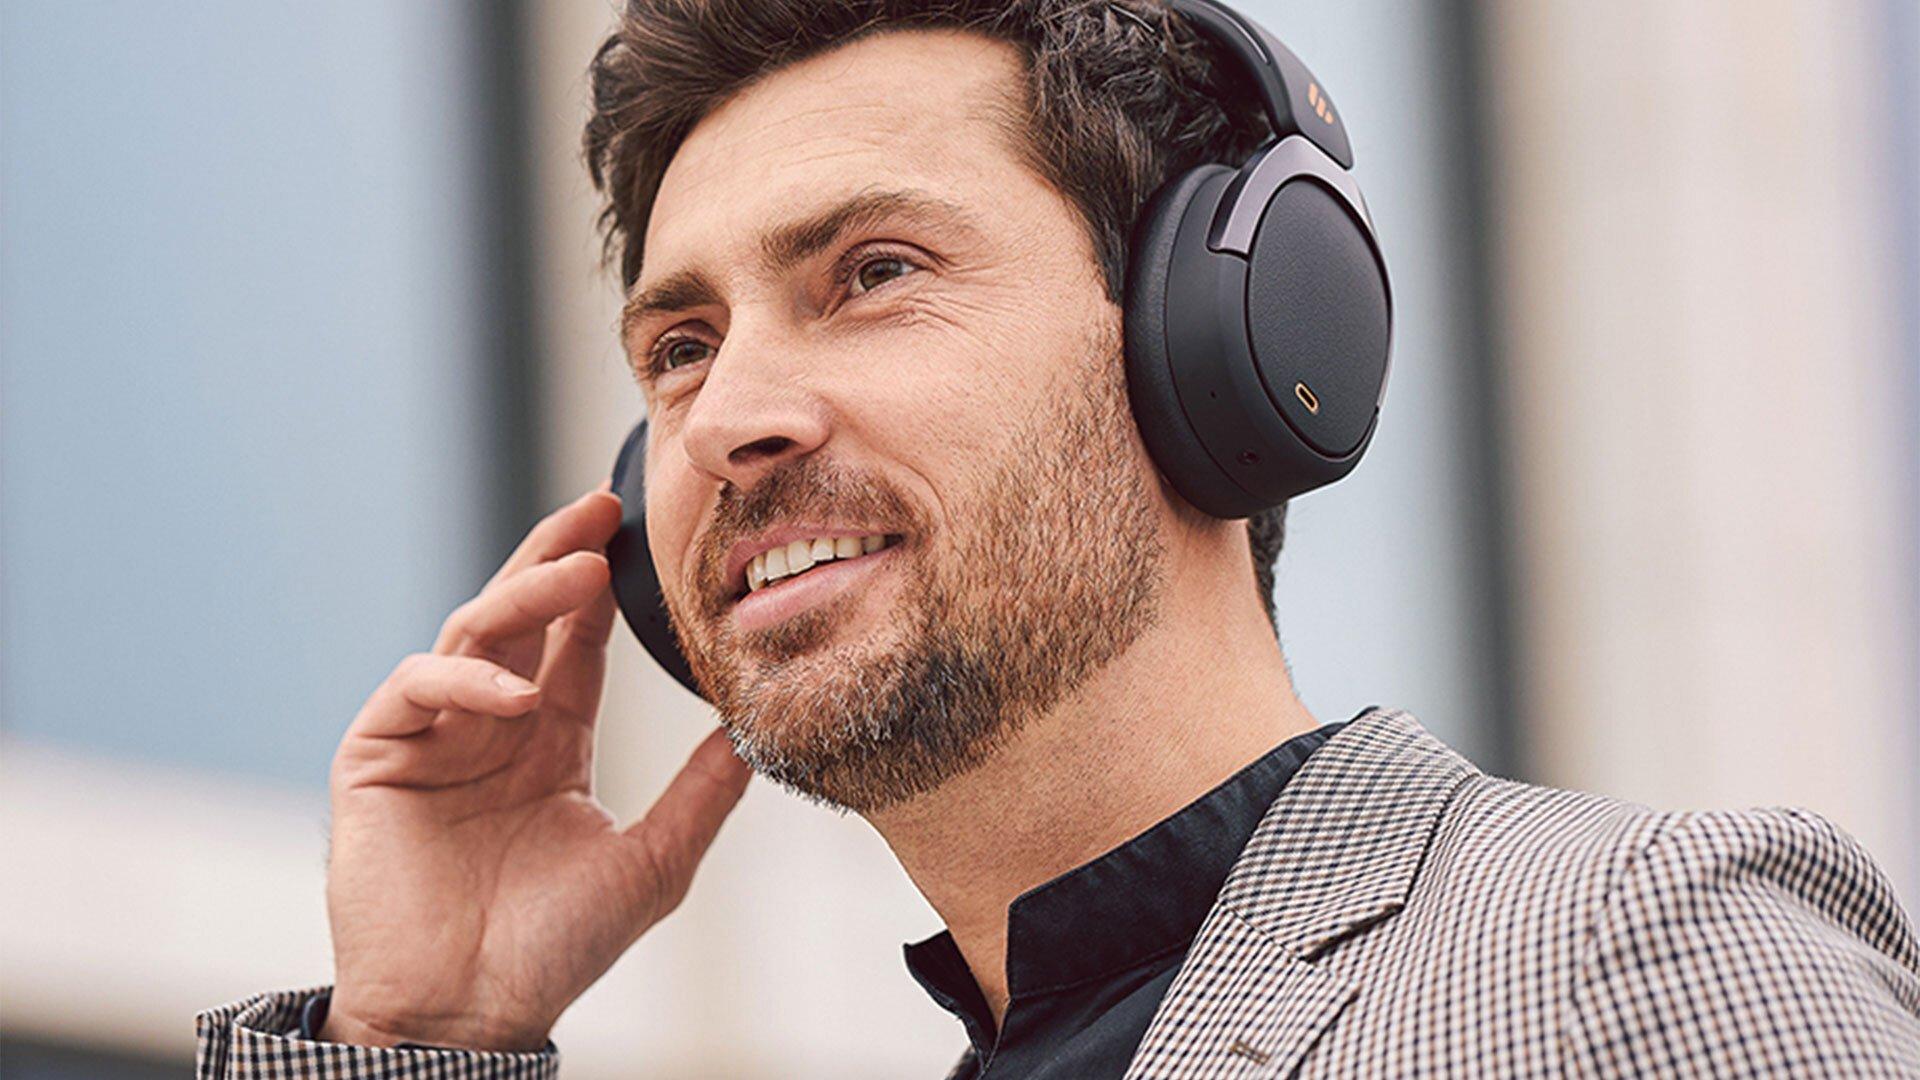 Picture shows a smiling man wearing headphones